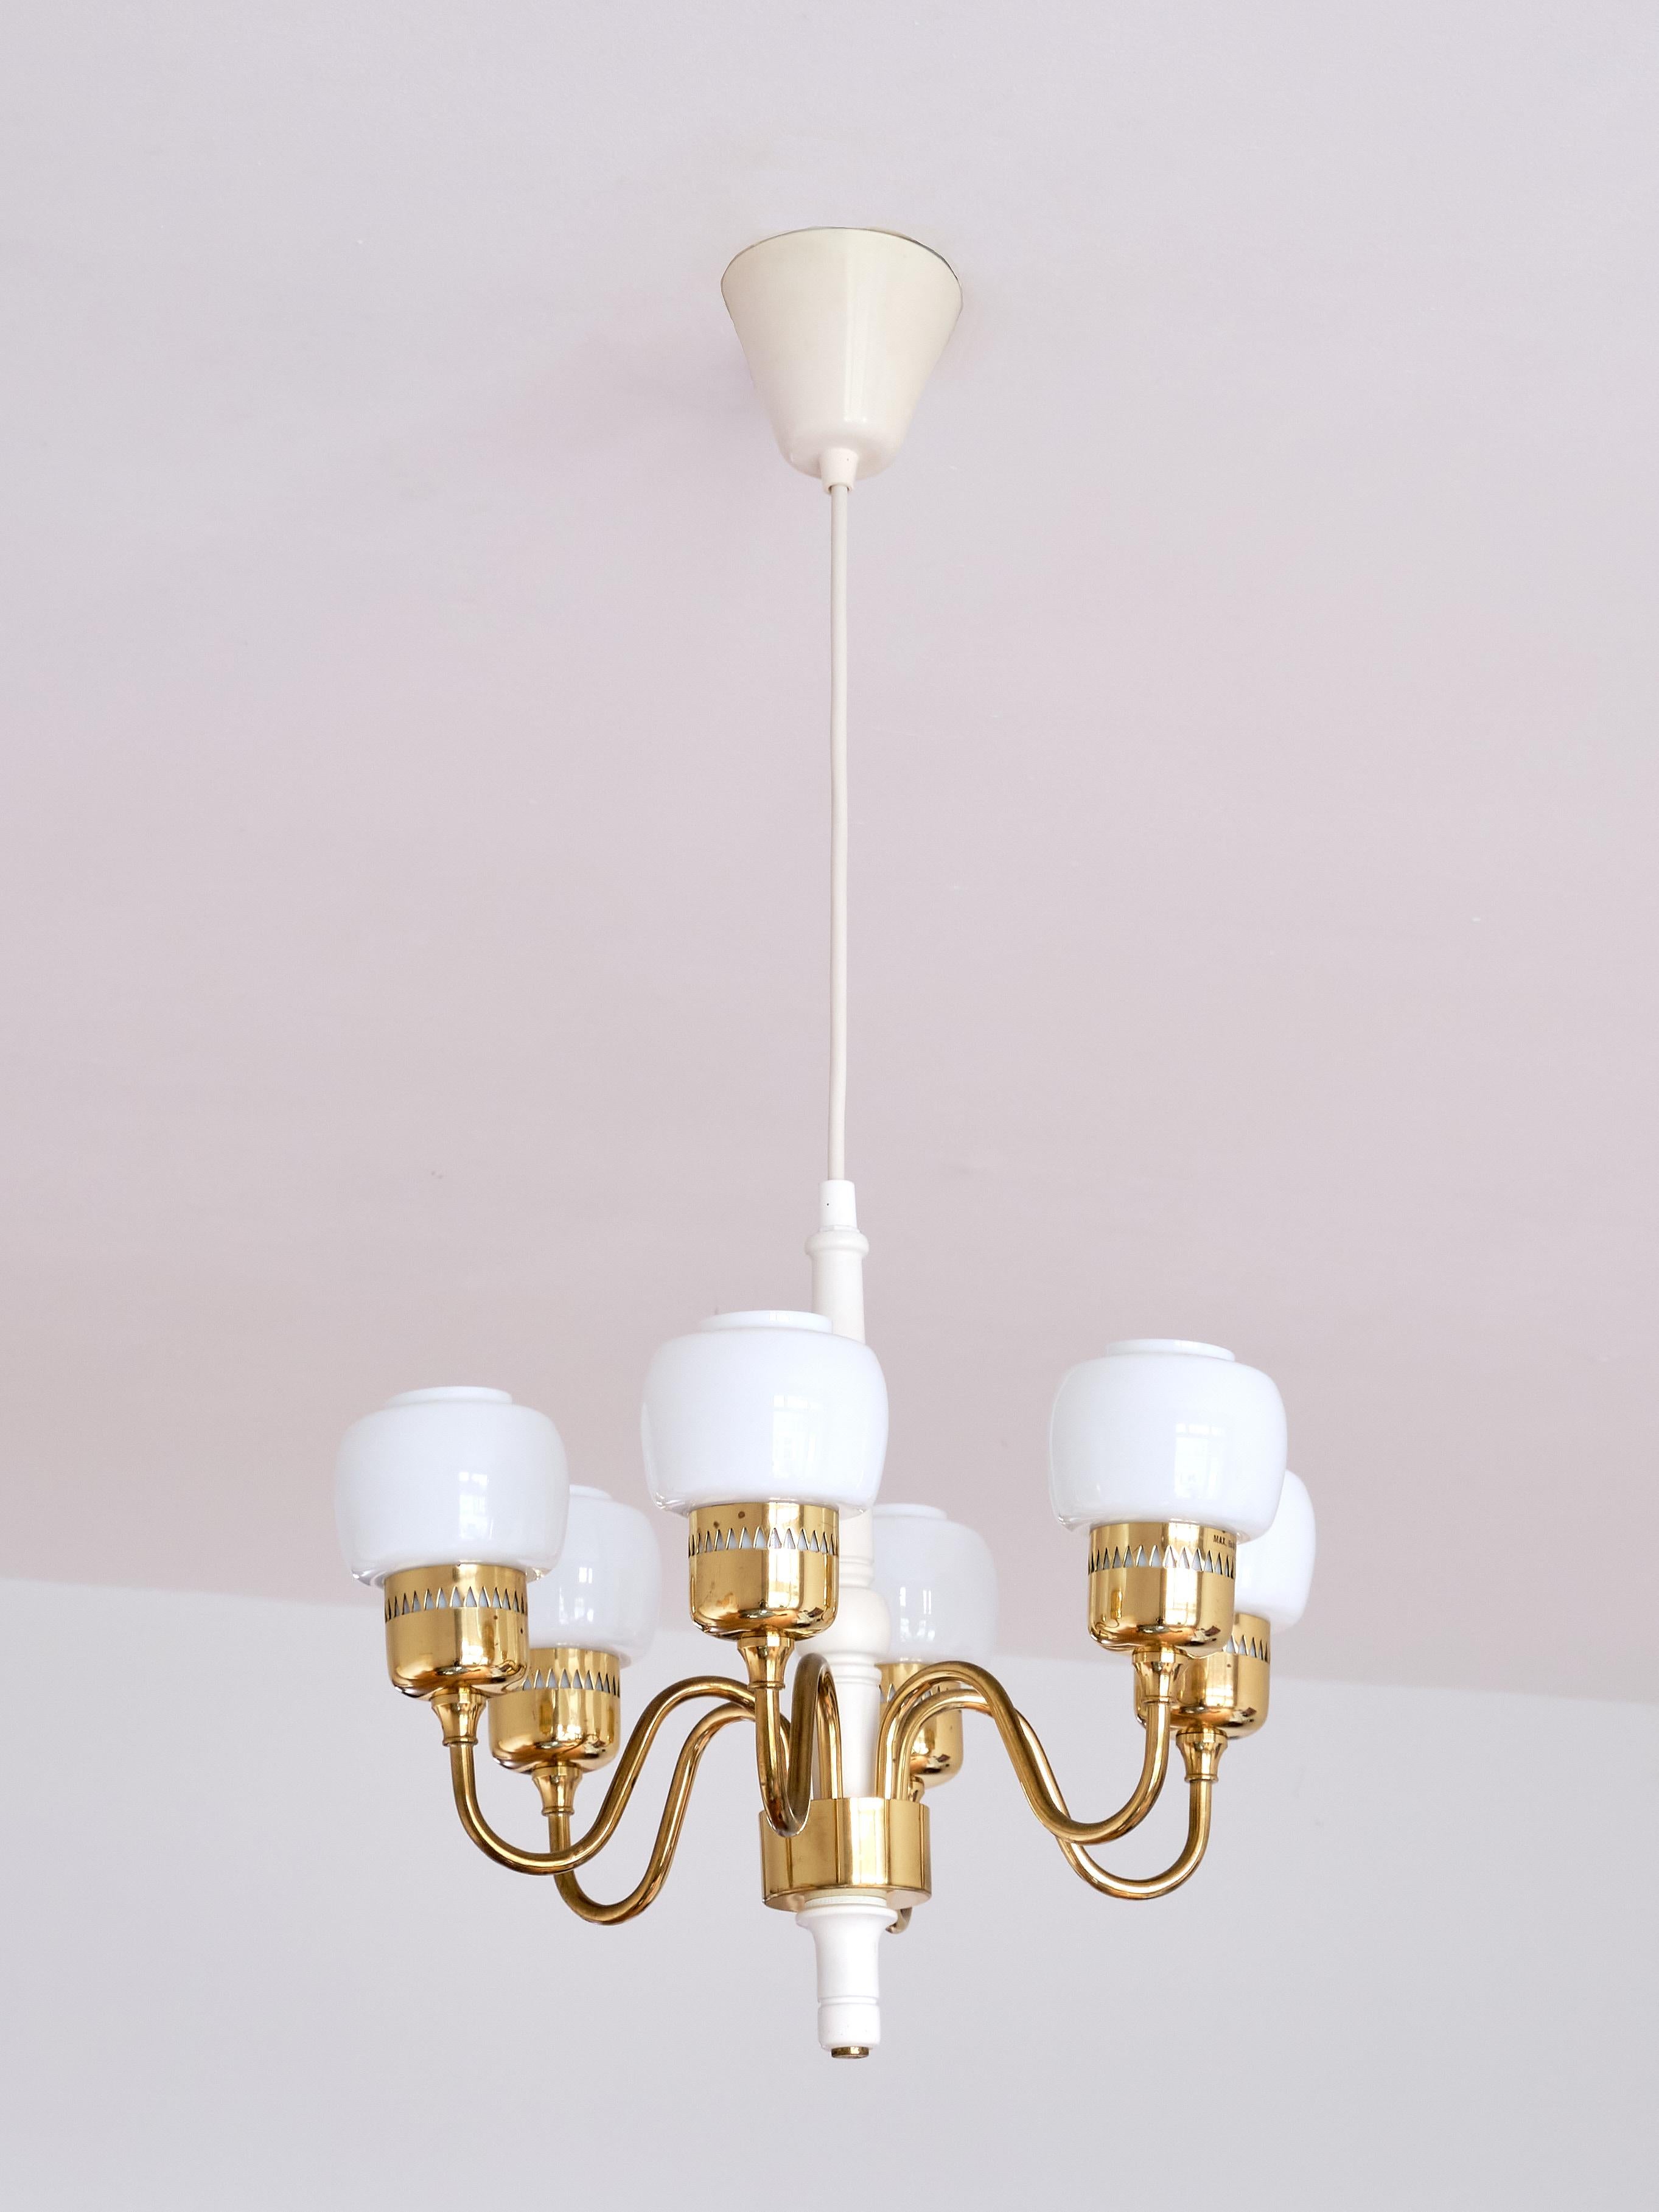 This elegant chandelier was designed by Hans-Agne Jakobsson and produced by his company in Markaryd, Sweden in the 1960s. This particular model is number T-526. The lamp consists of a brass ring with six arms and shade holders in brass as well. The